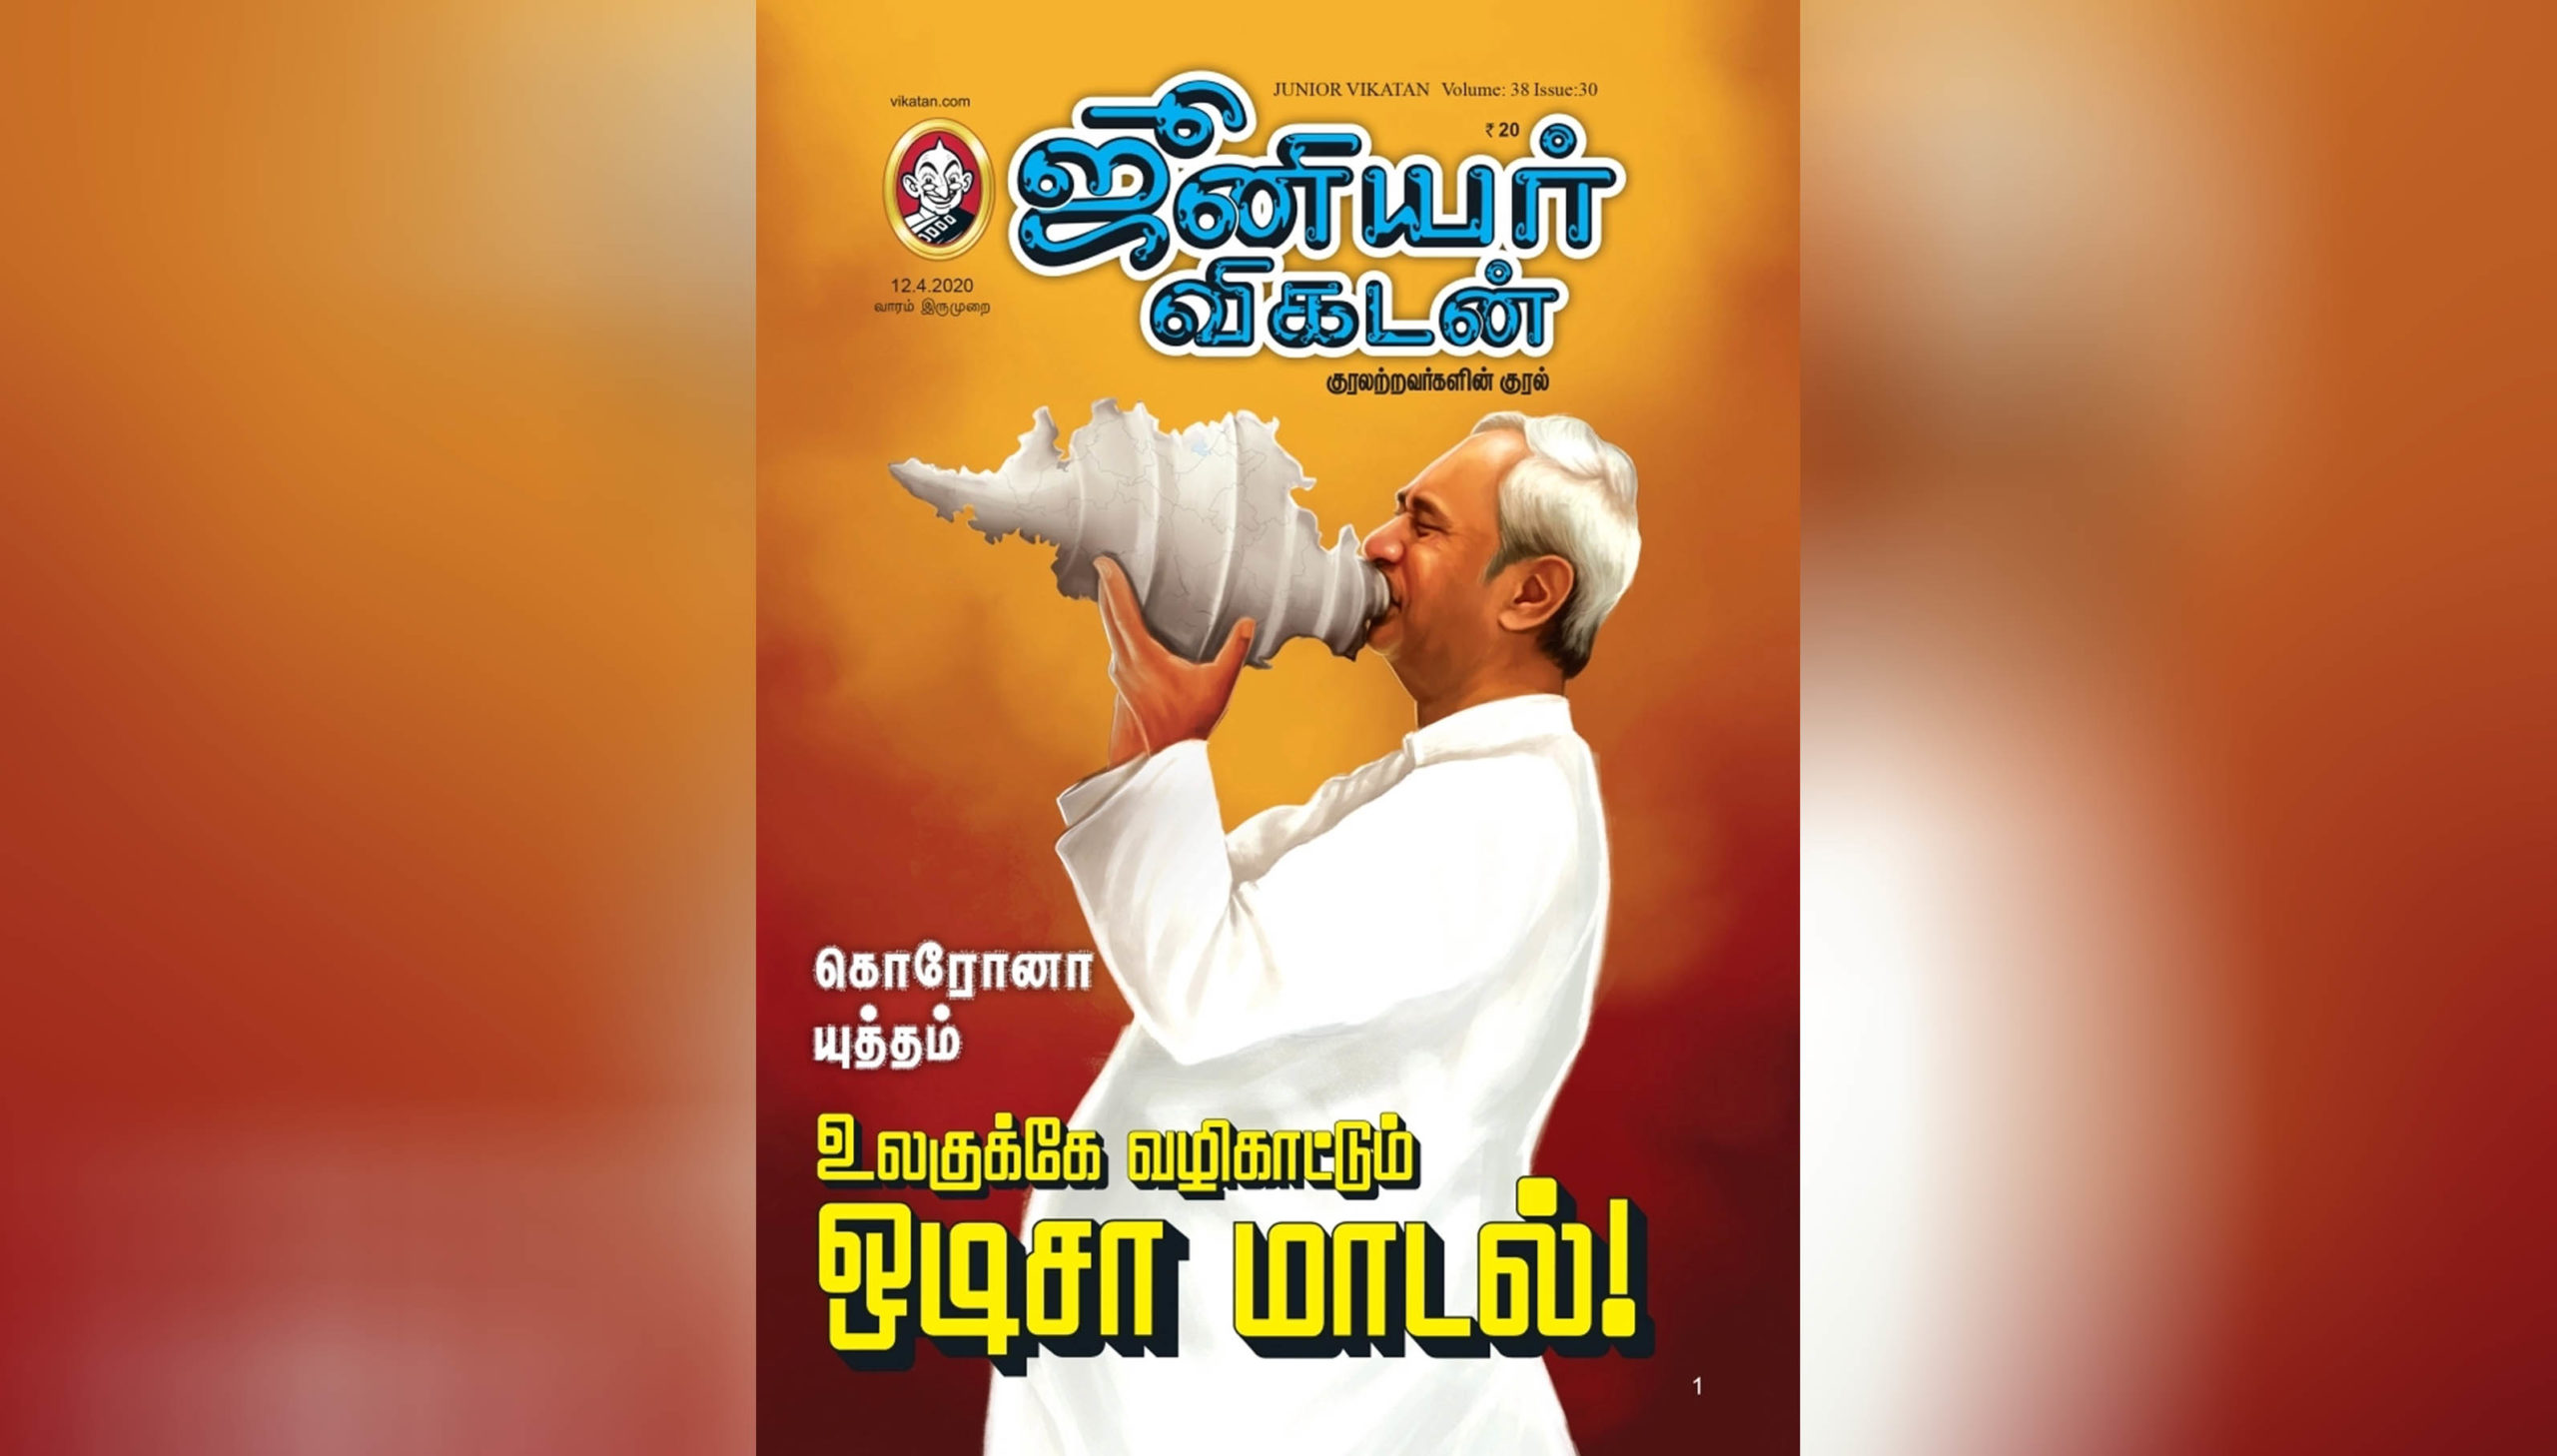 Naveen Patnaik on the cover page of Junior Vikatan Tamil Magazine 12 April 2020 issue scaled